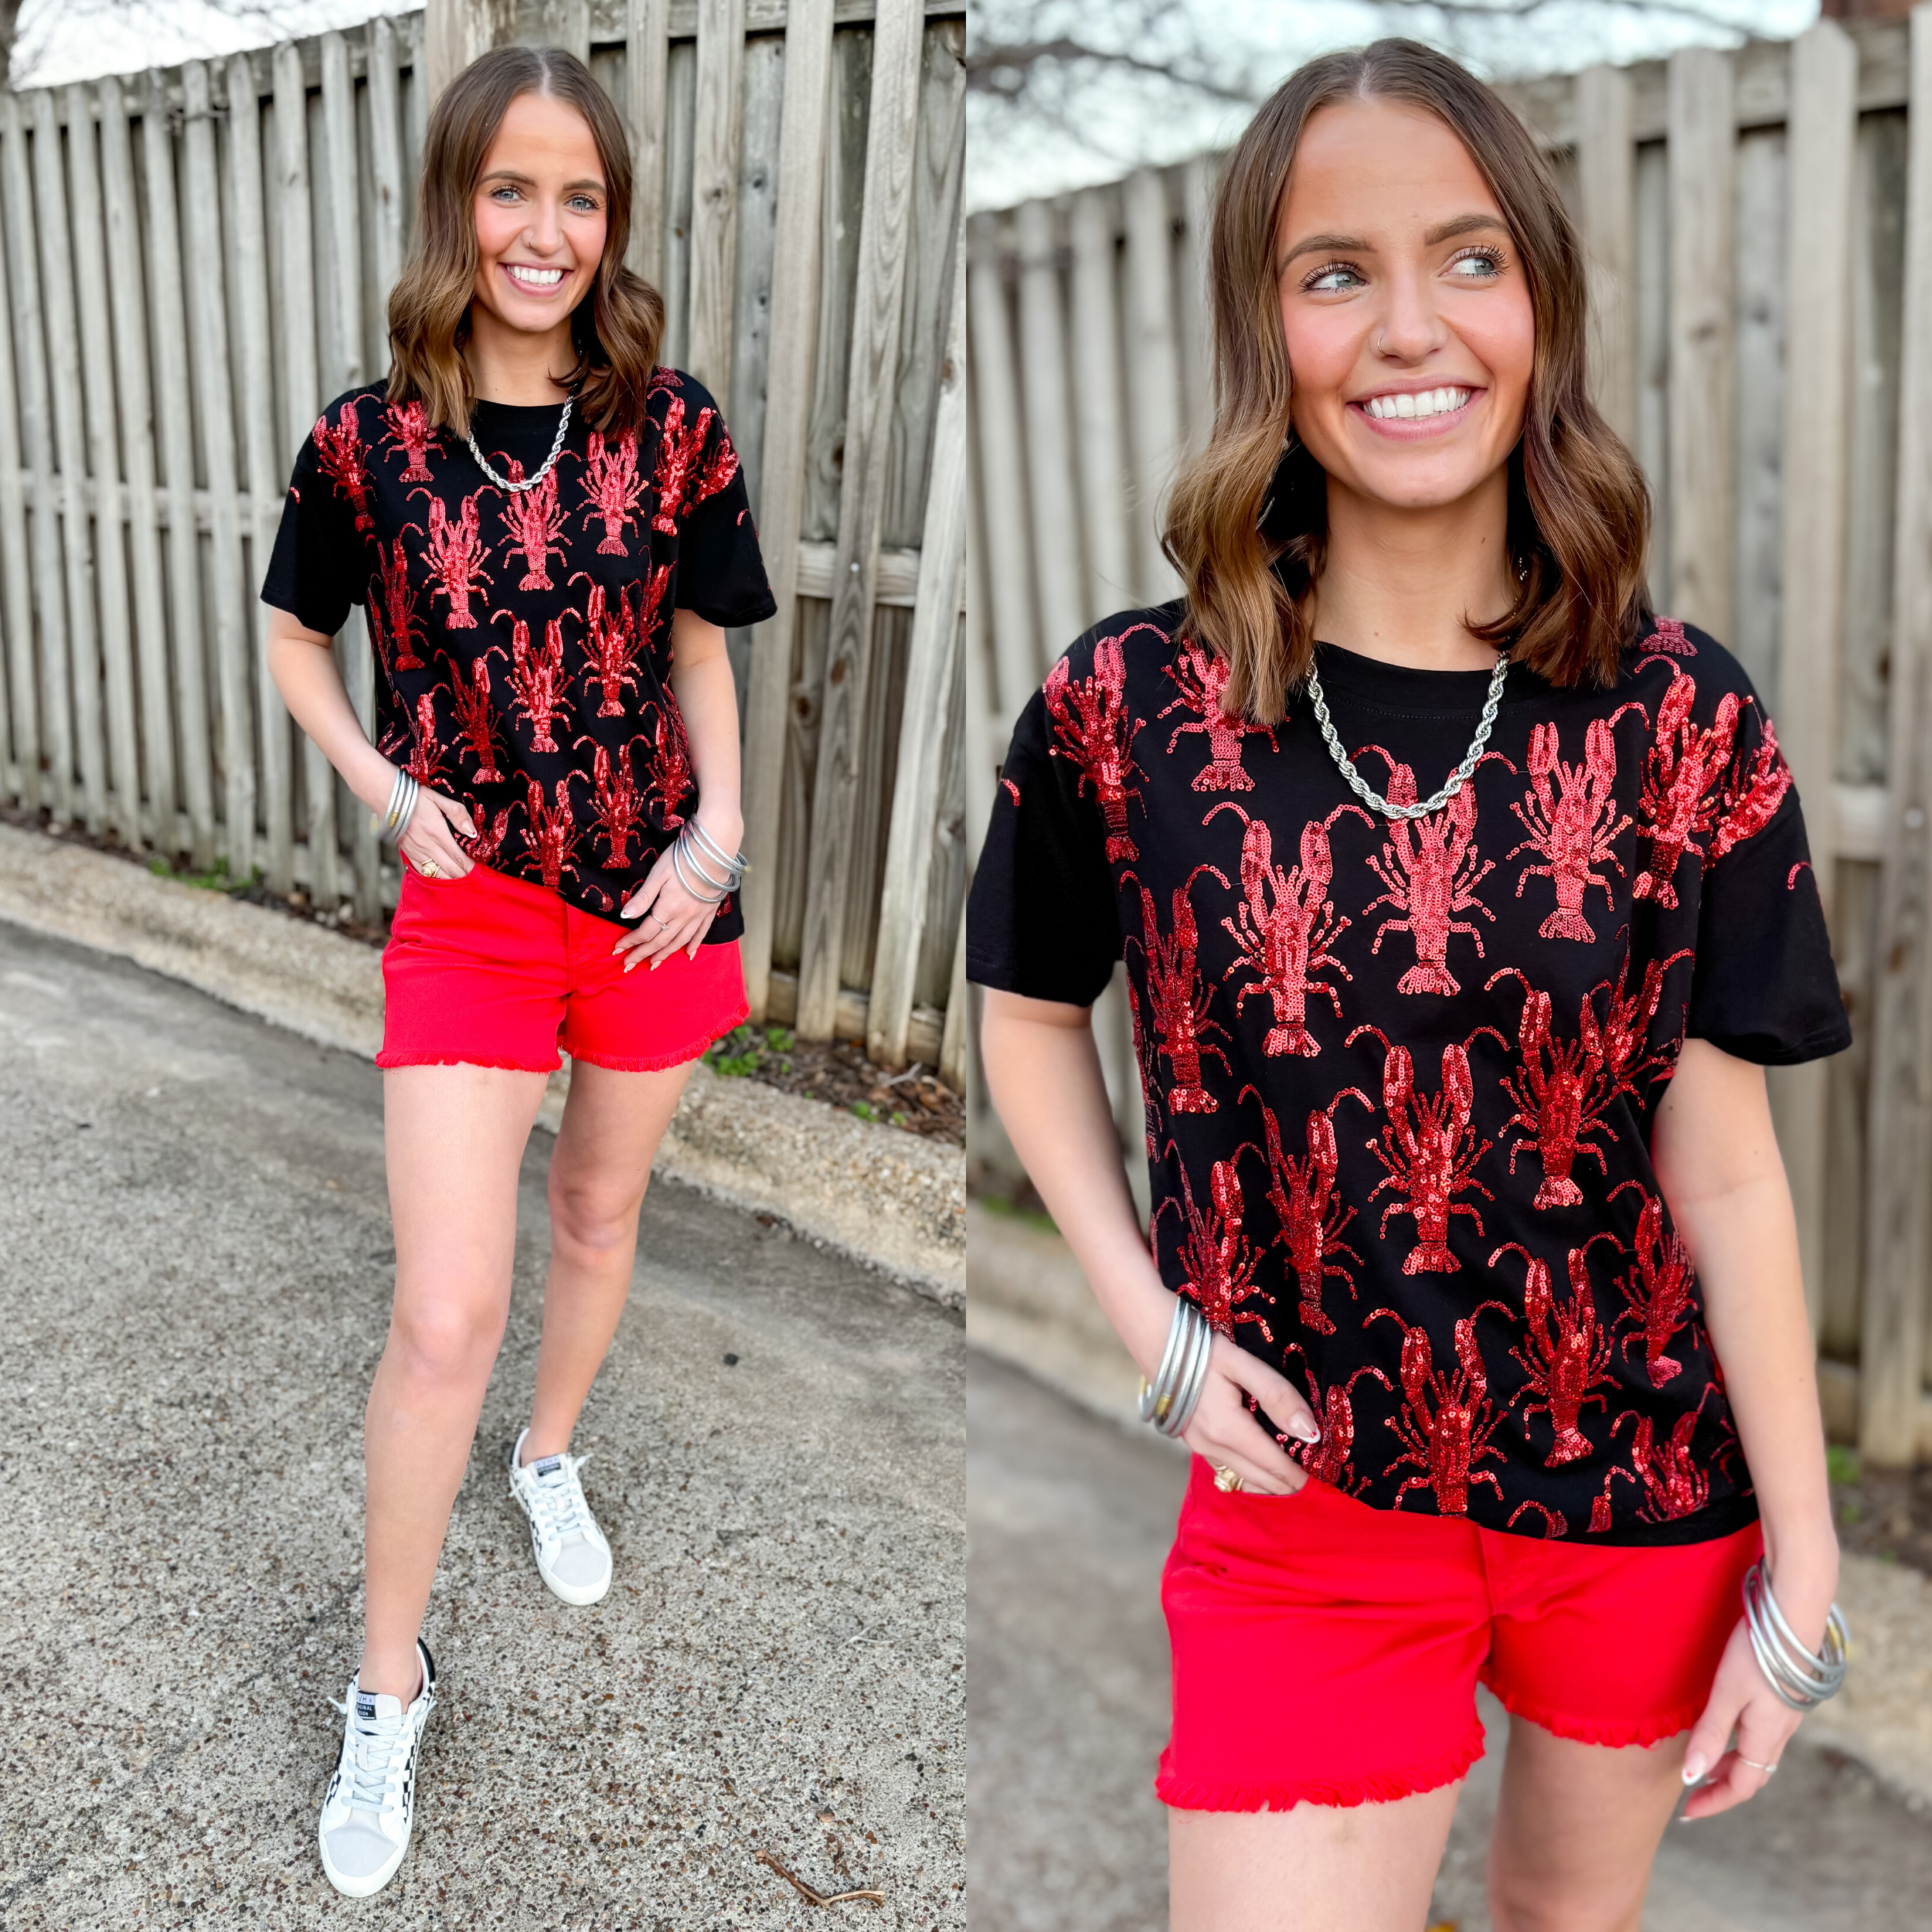 Queen Of Sparkles | Bayou Beauty Fully Sequin Crawfish Short Sleeve Tee in Black - Giddy Up Glamour Boutique